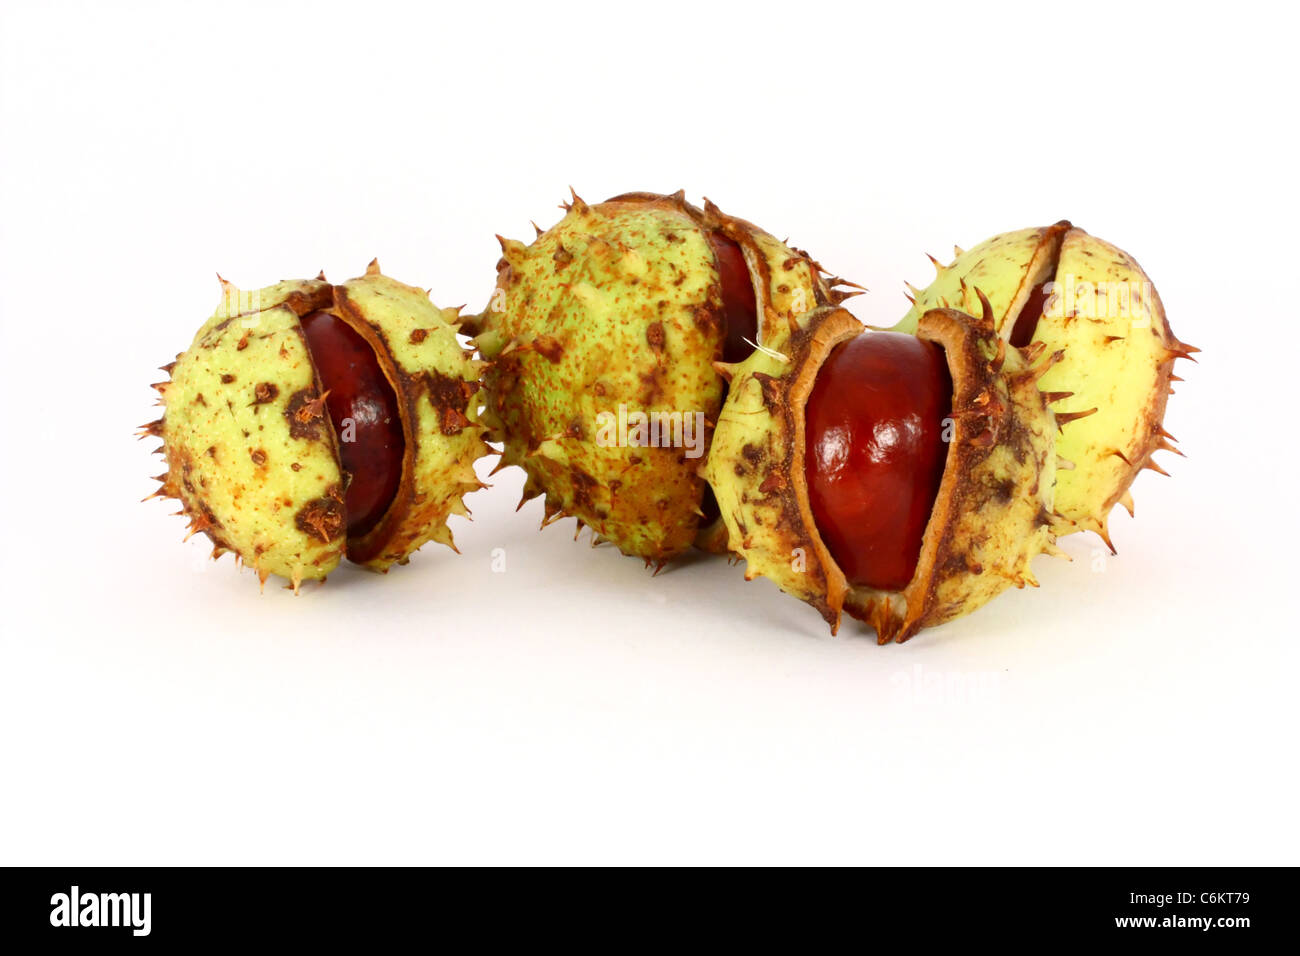 Wild horse chestnut in shells, gifts from fall, isolated Stock Photo